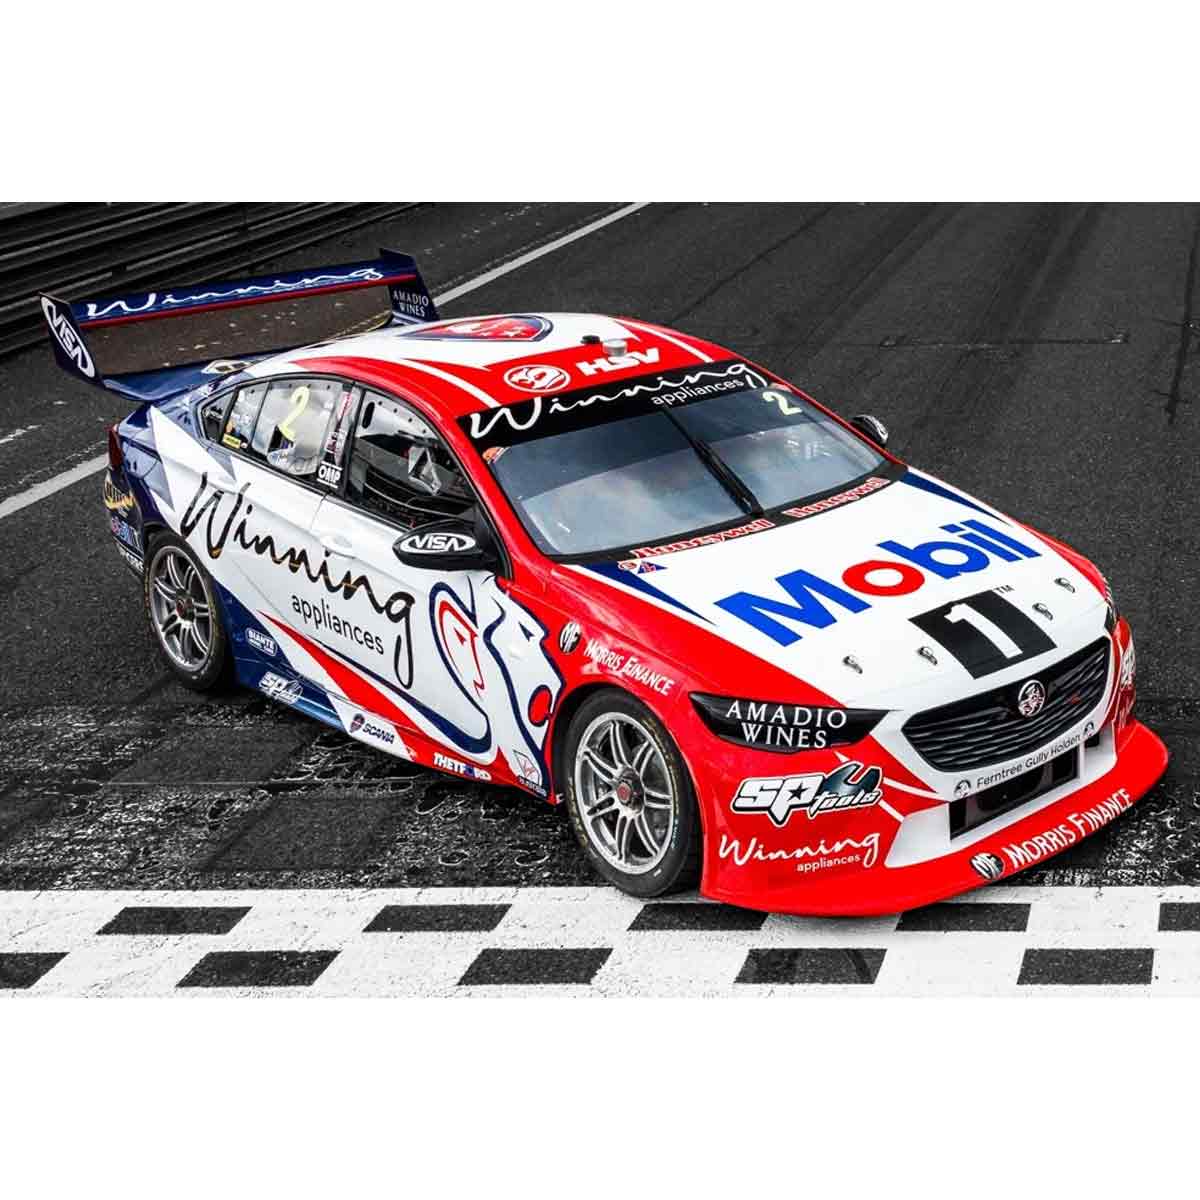 Holden ZB Commodore - #2 Drivers: Pye/Luff